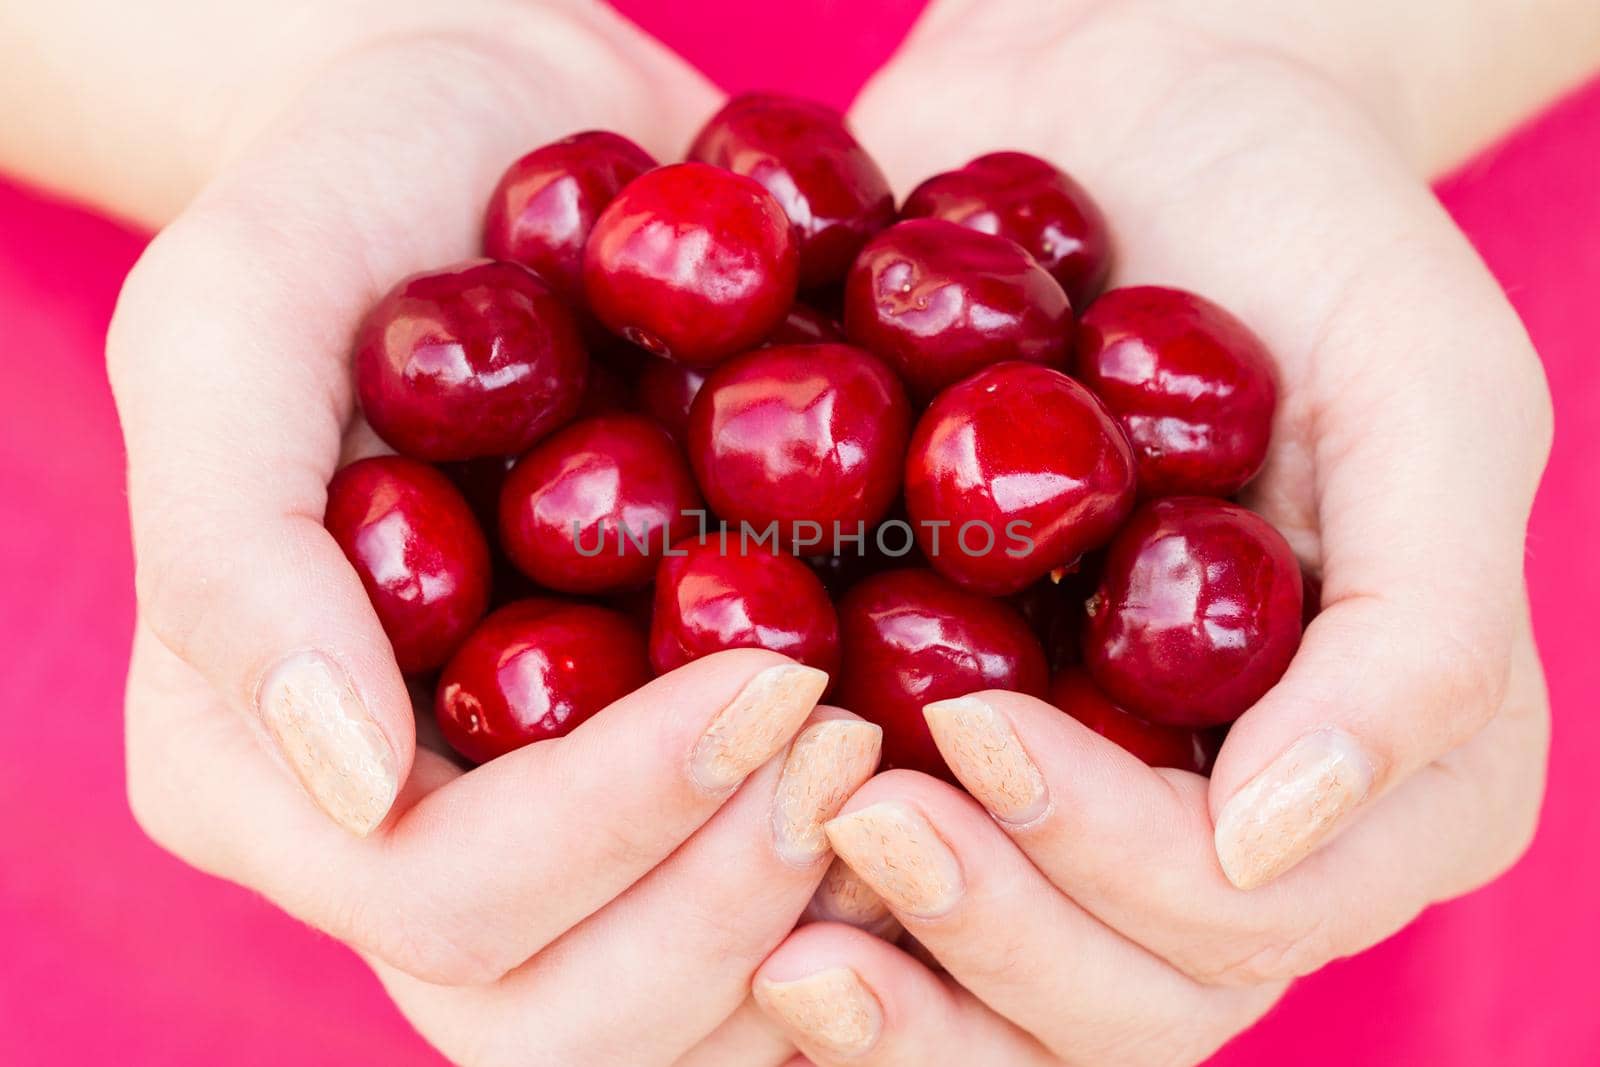 Female hands are holding fresh red cherries on pink background by marketlan